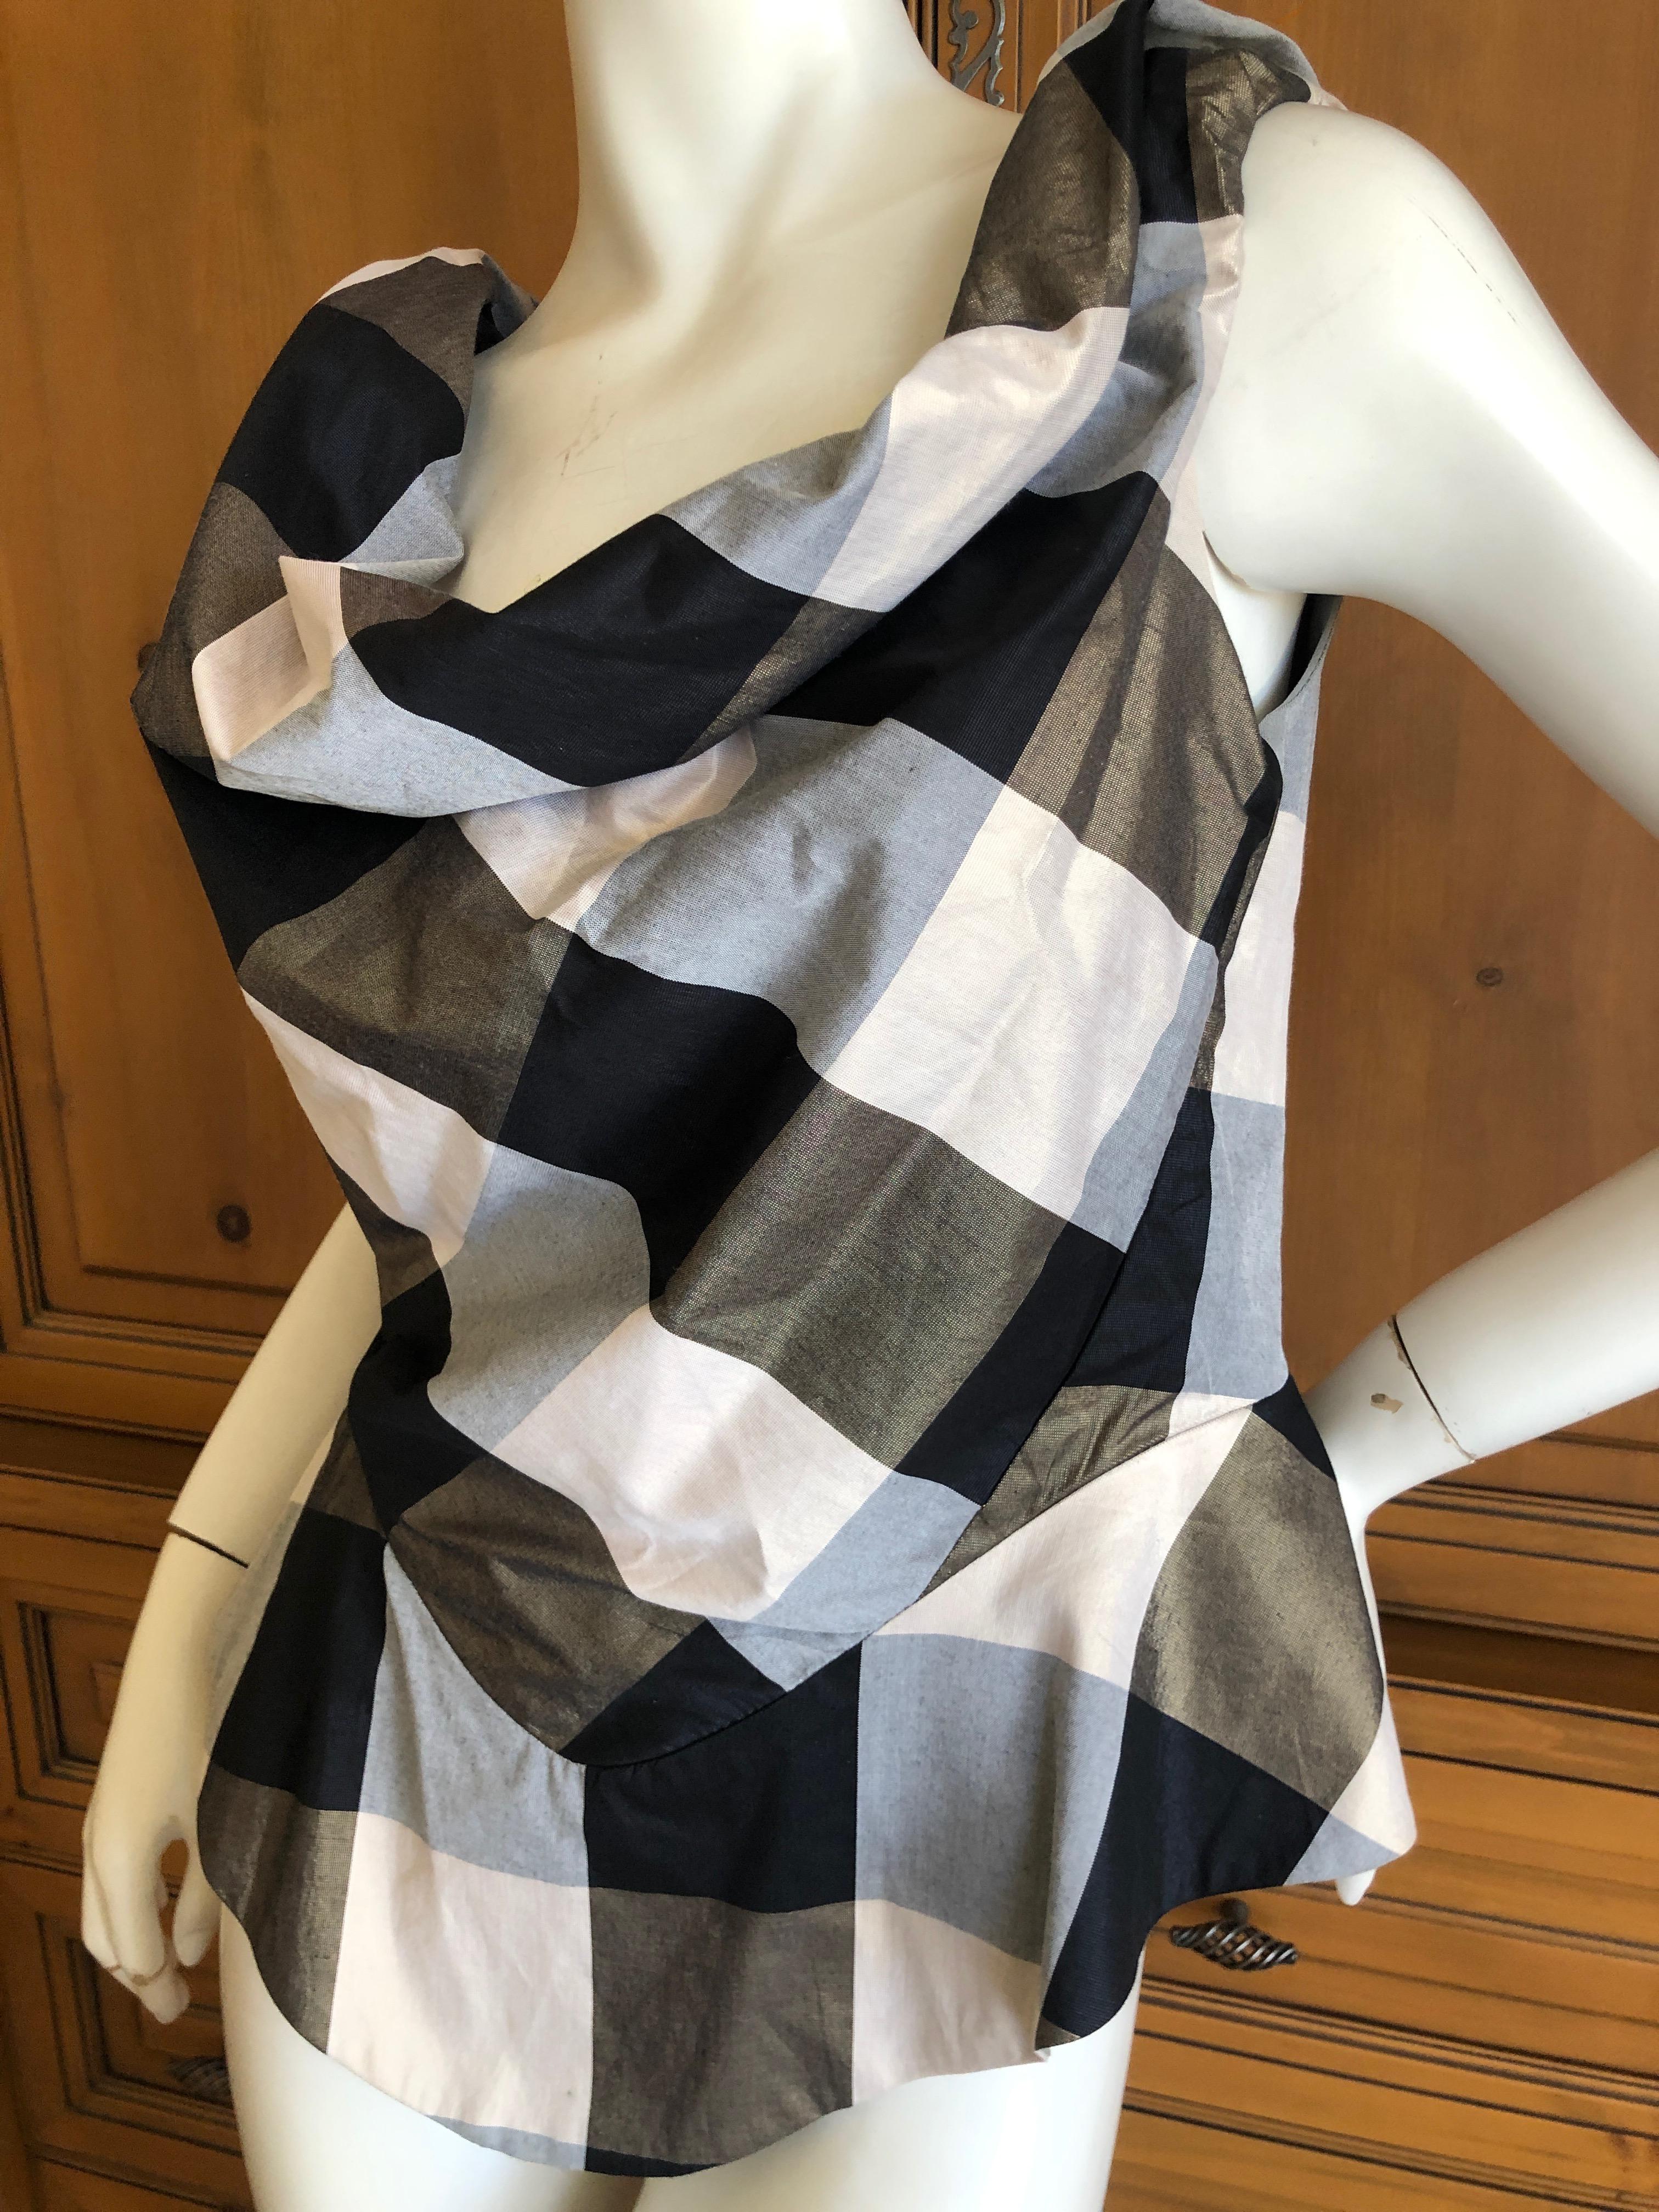 Vivienne Westwood Anglomania Gray Plaid Top In Excellent Condition For Sale In Cloverdale, CA